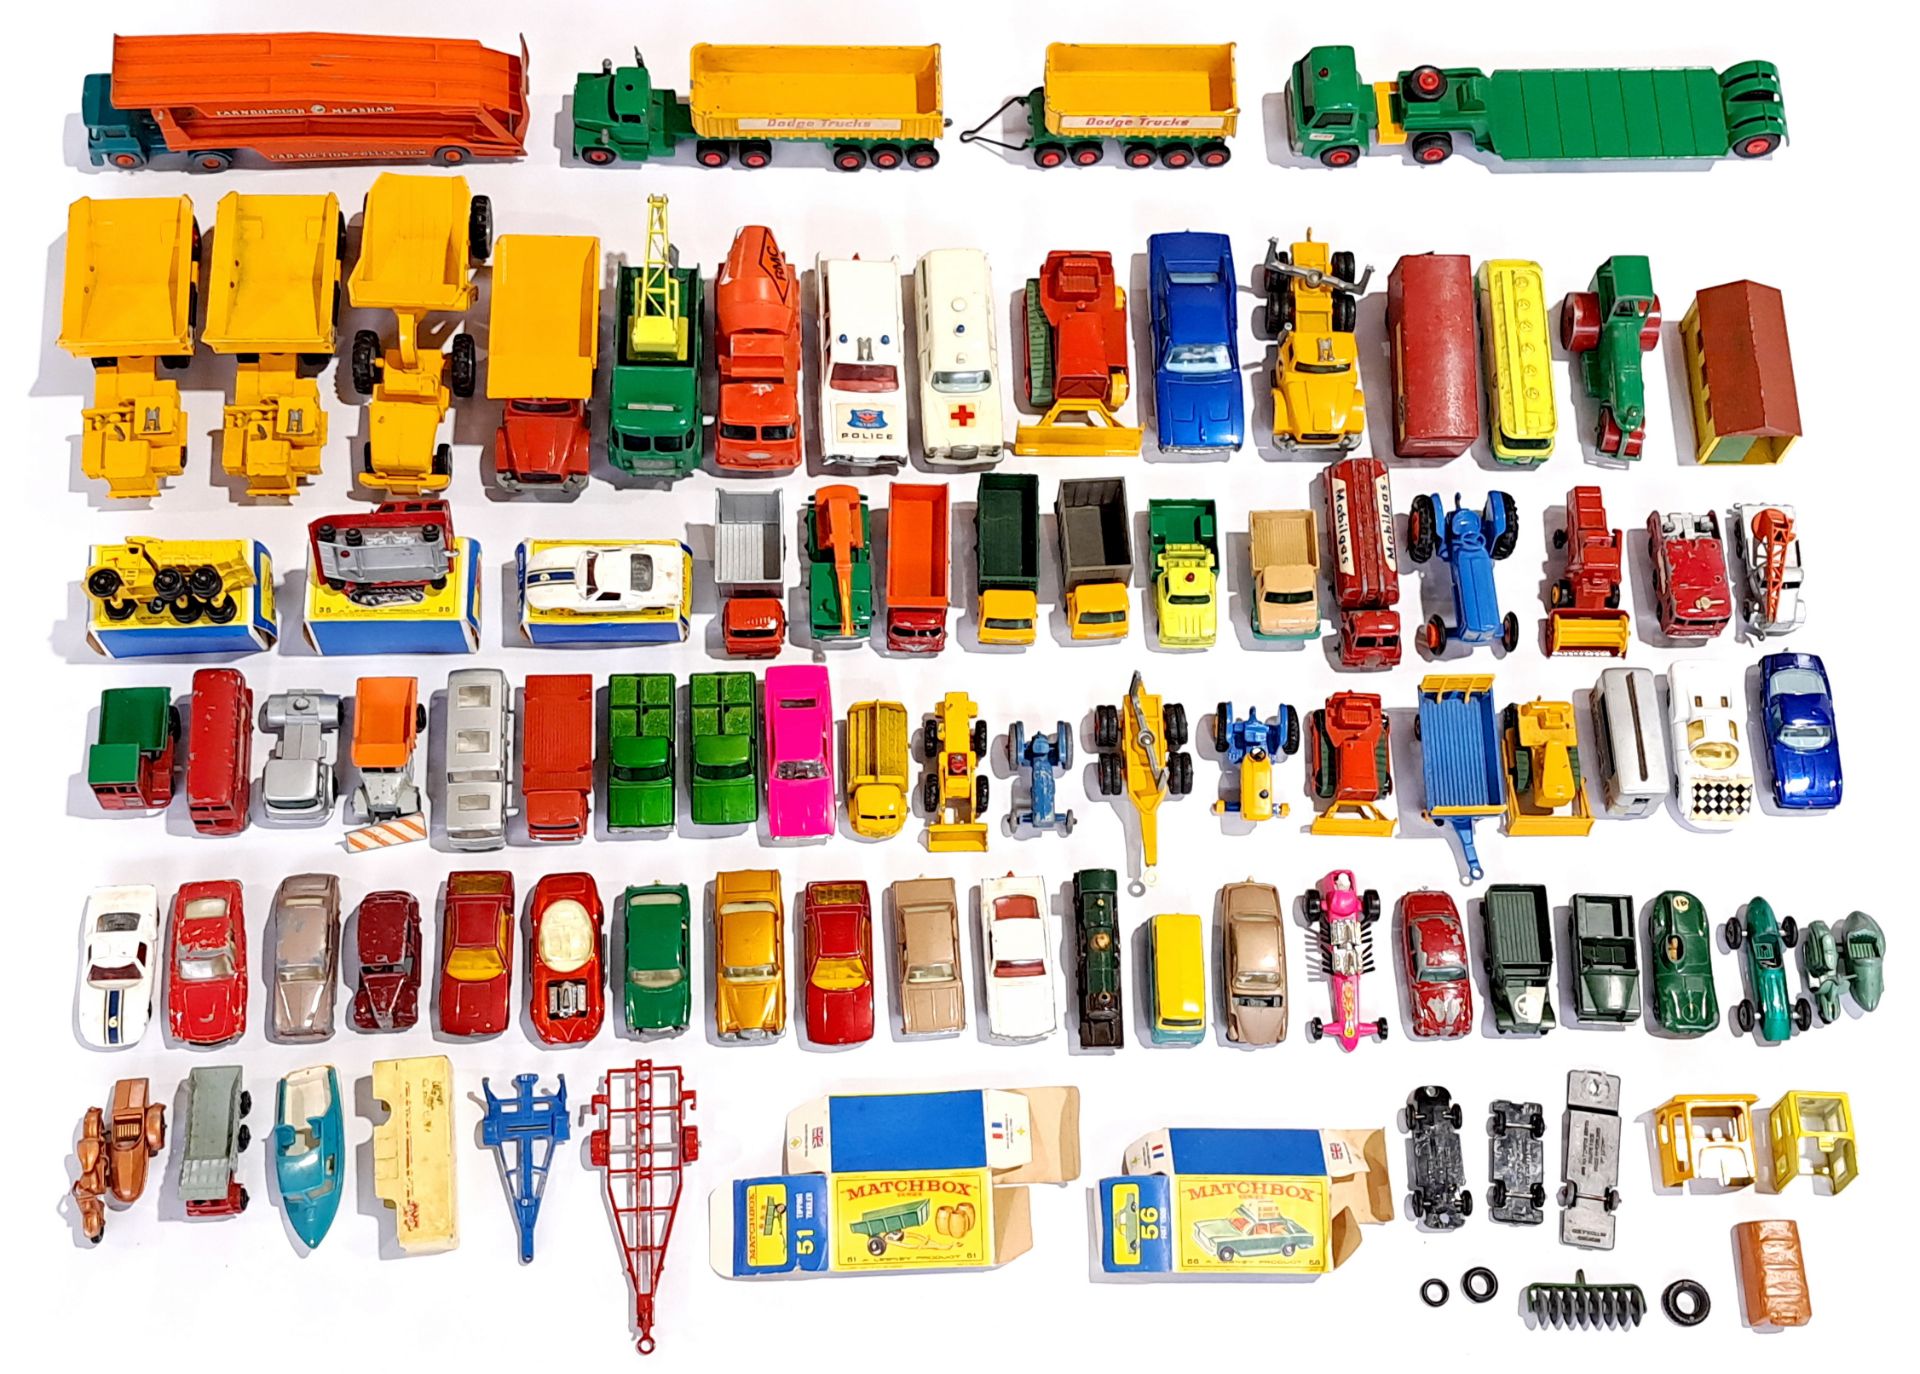 Matchbox, a mostly unboxed mixed vehicle group